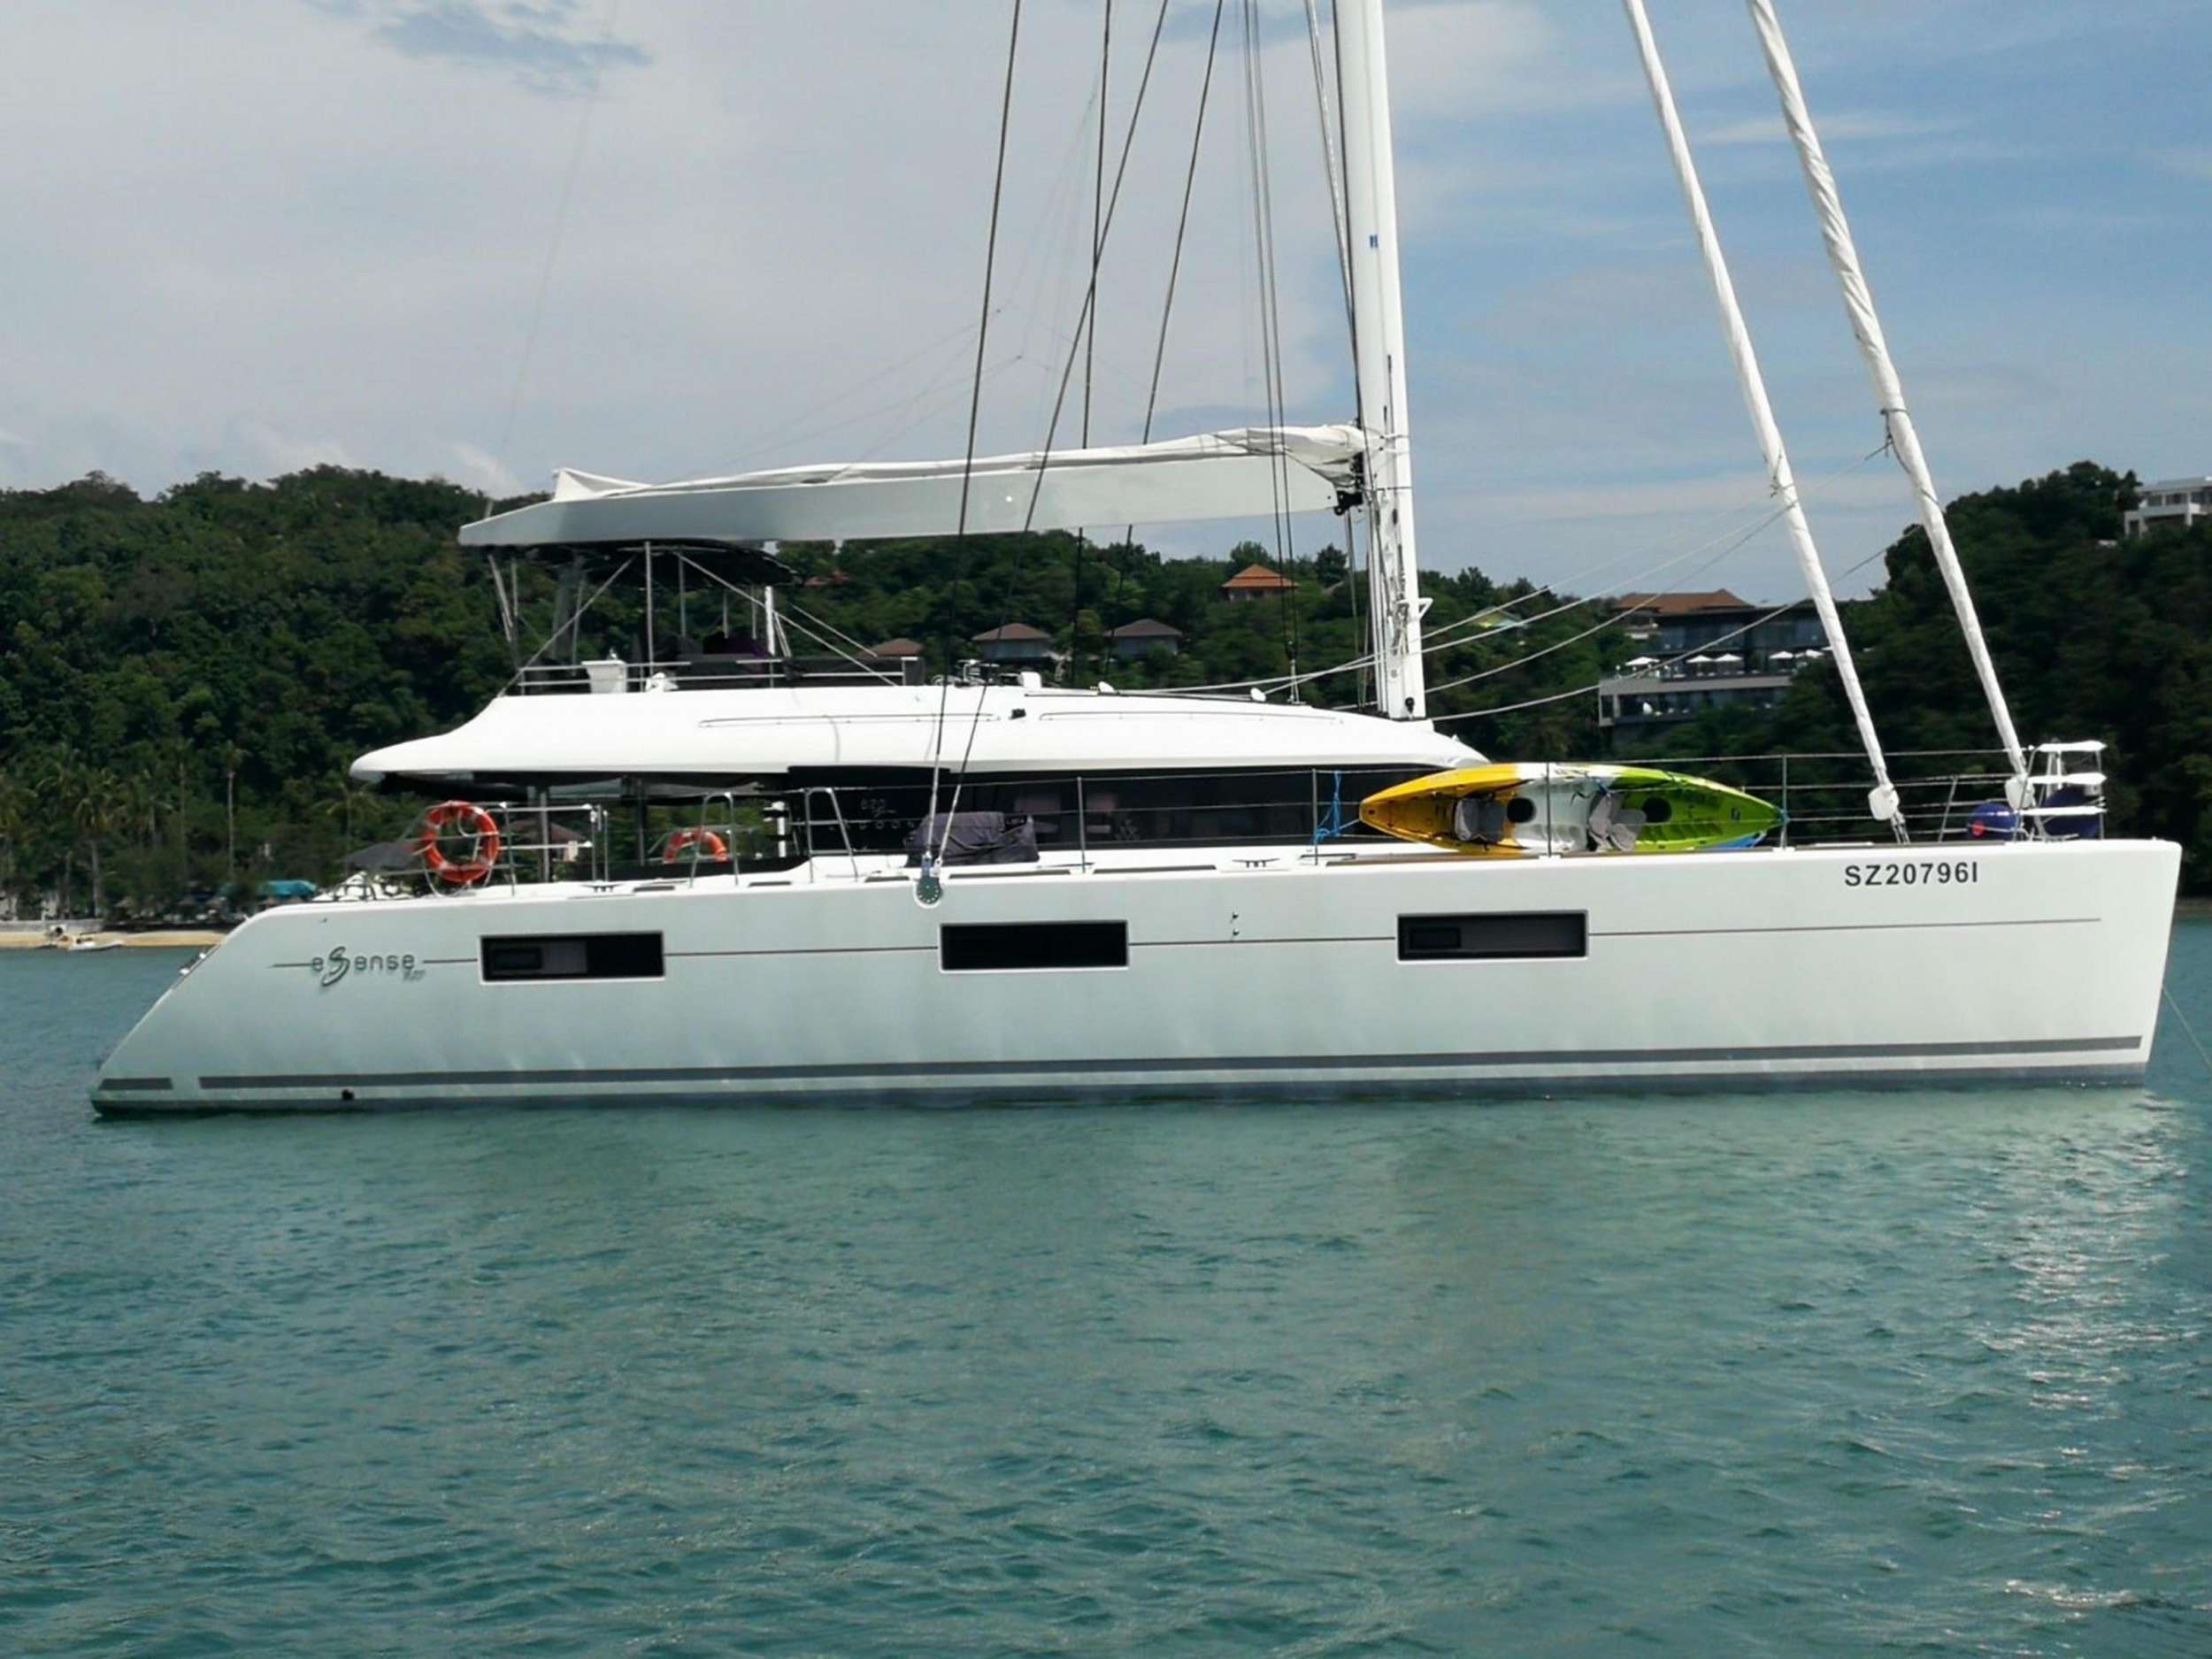 Six Degrees Yacht Charter - Ritzy Charters